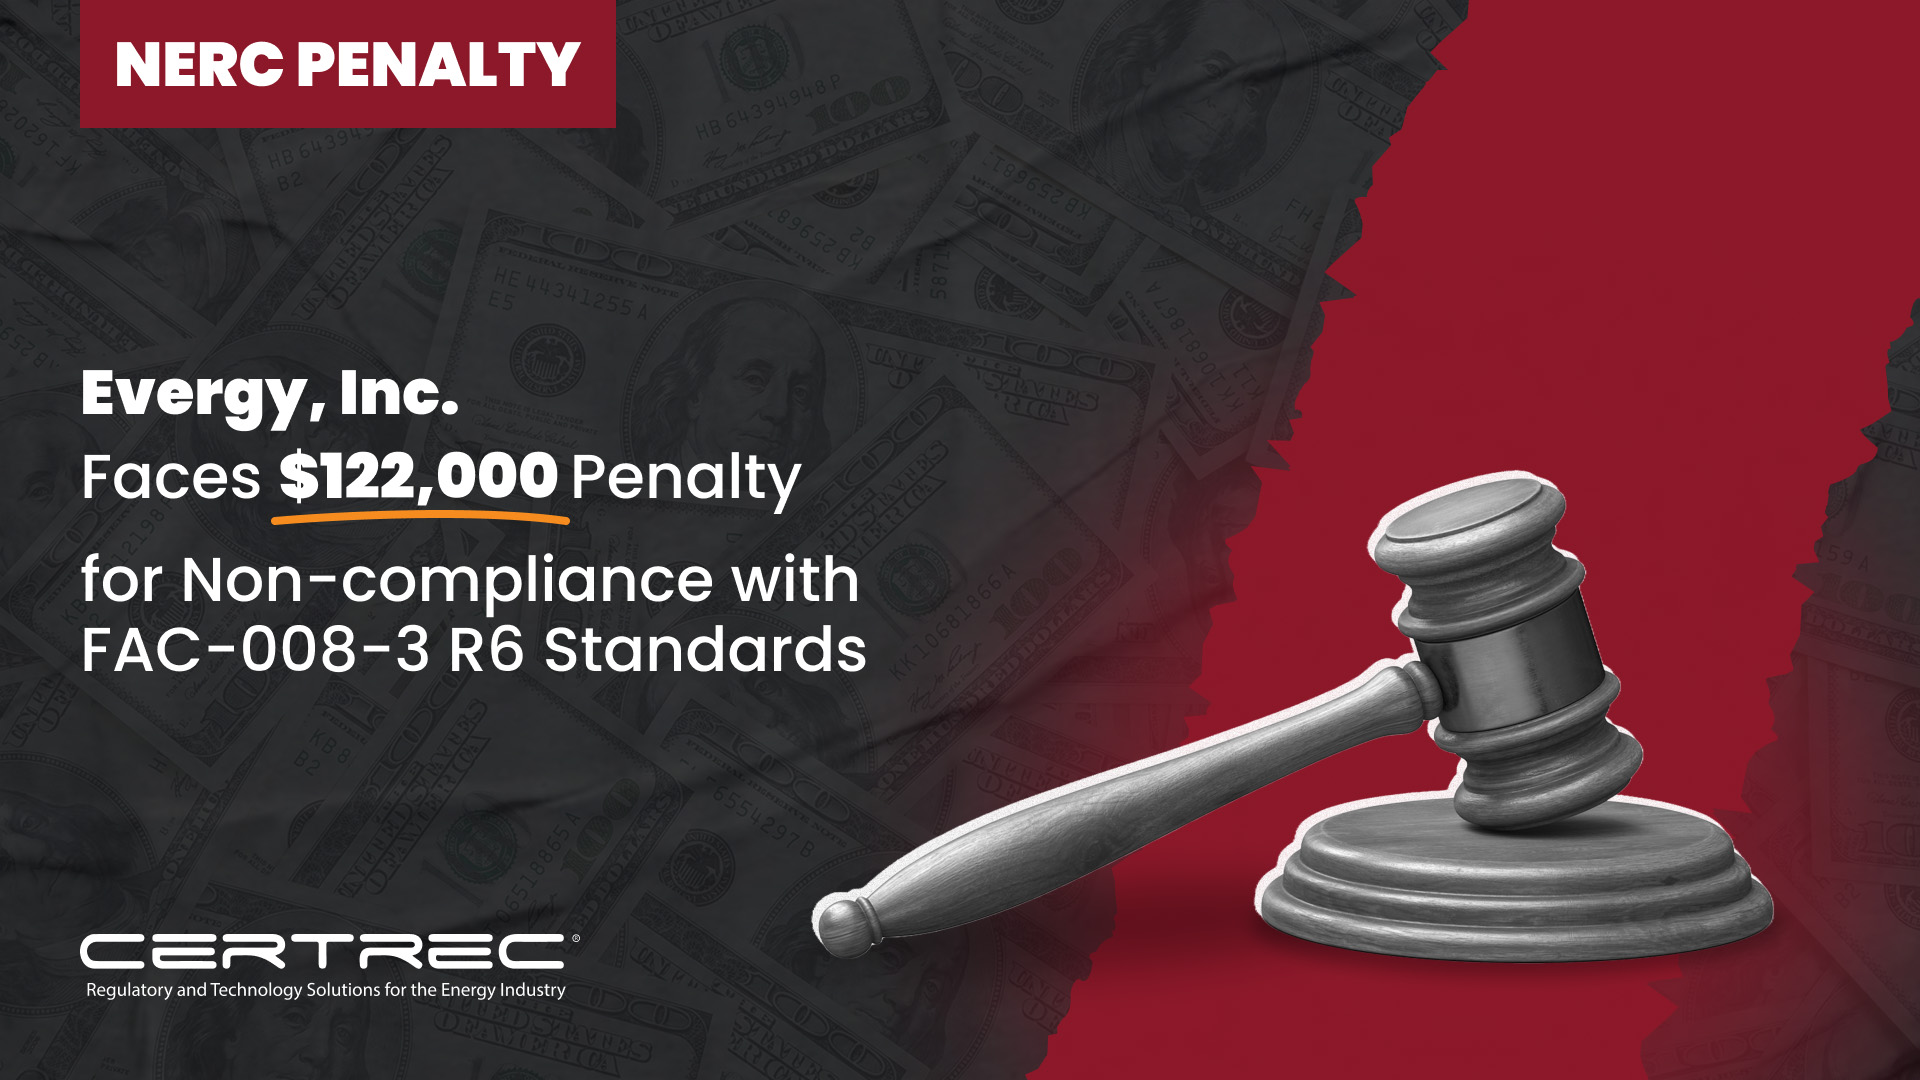 Evergy, Inc. Faces $122,000 Penalty for Non-compliance with FAC-008-3 R6 Standards - Certrec